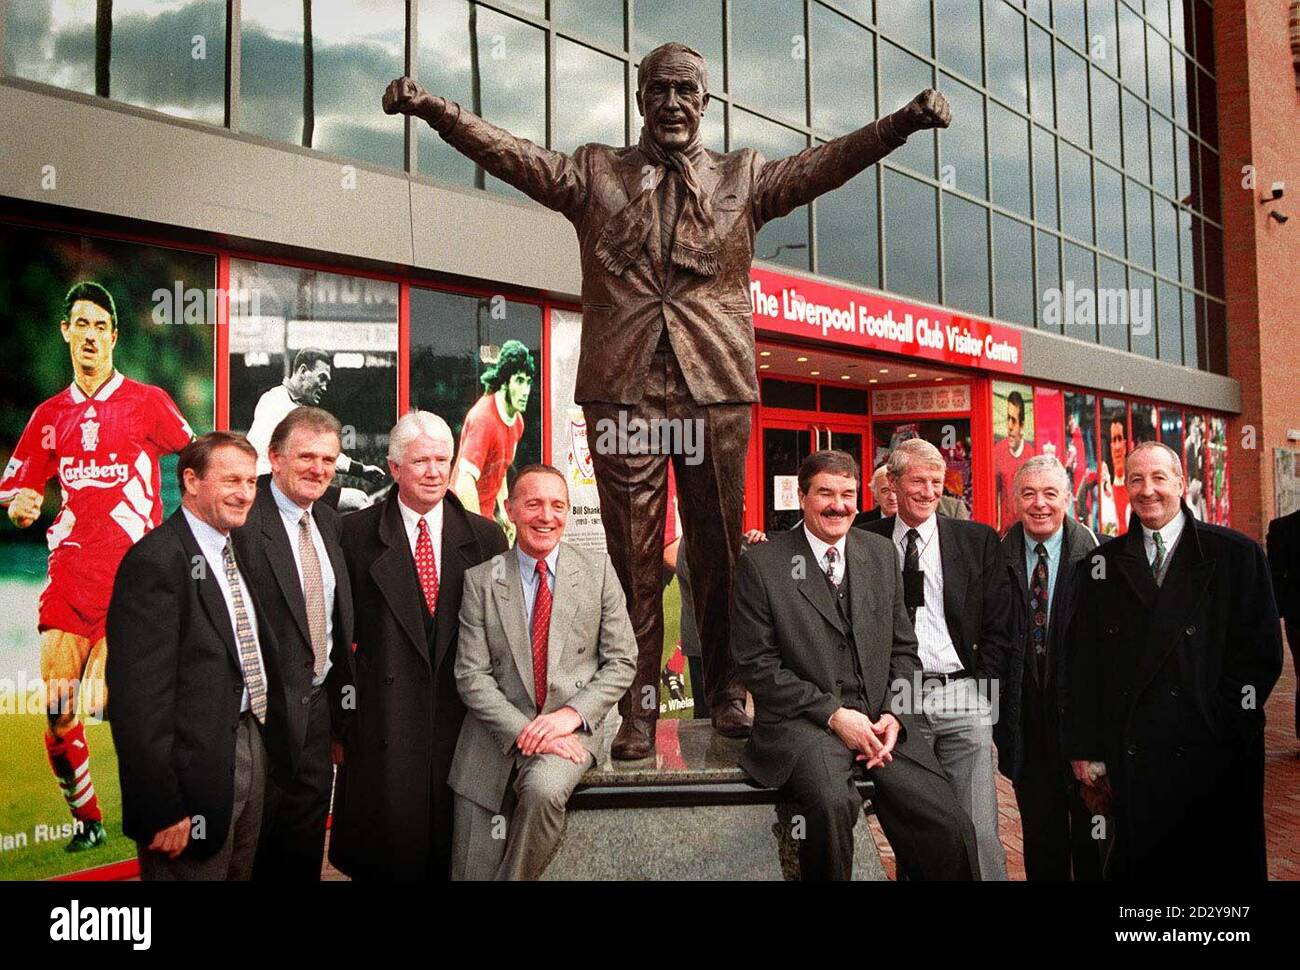 Liverpool greats from the past gather in front of the statue of the club's legendary manager, Bill Shankly, which was unveiled outside Anfield today (Thursday).  The bronze statue, created by local artist Tom Murphy and commissioned by the club's sponsors Carlsberg, is now a permenant fixture welcoming every Kop fan to the ground. Left to right: Roger Hunt, Tommy Lawrence, Chris Lawler, Peter Thompson, Ron Yeats, Willie Stevenson, Ian Callaghan and Gerry Byrne. Stock Photo